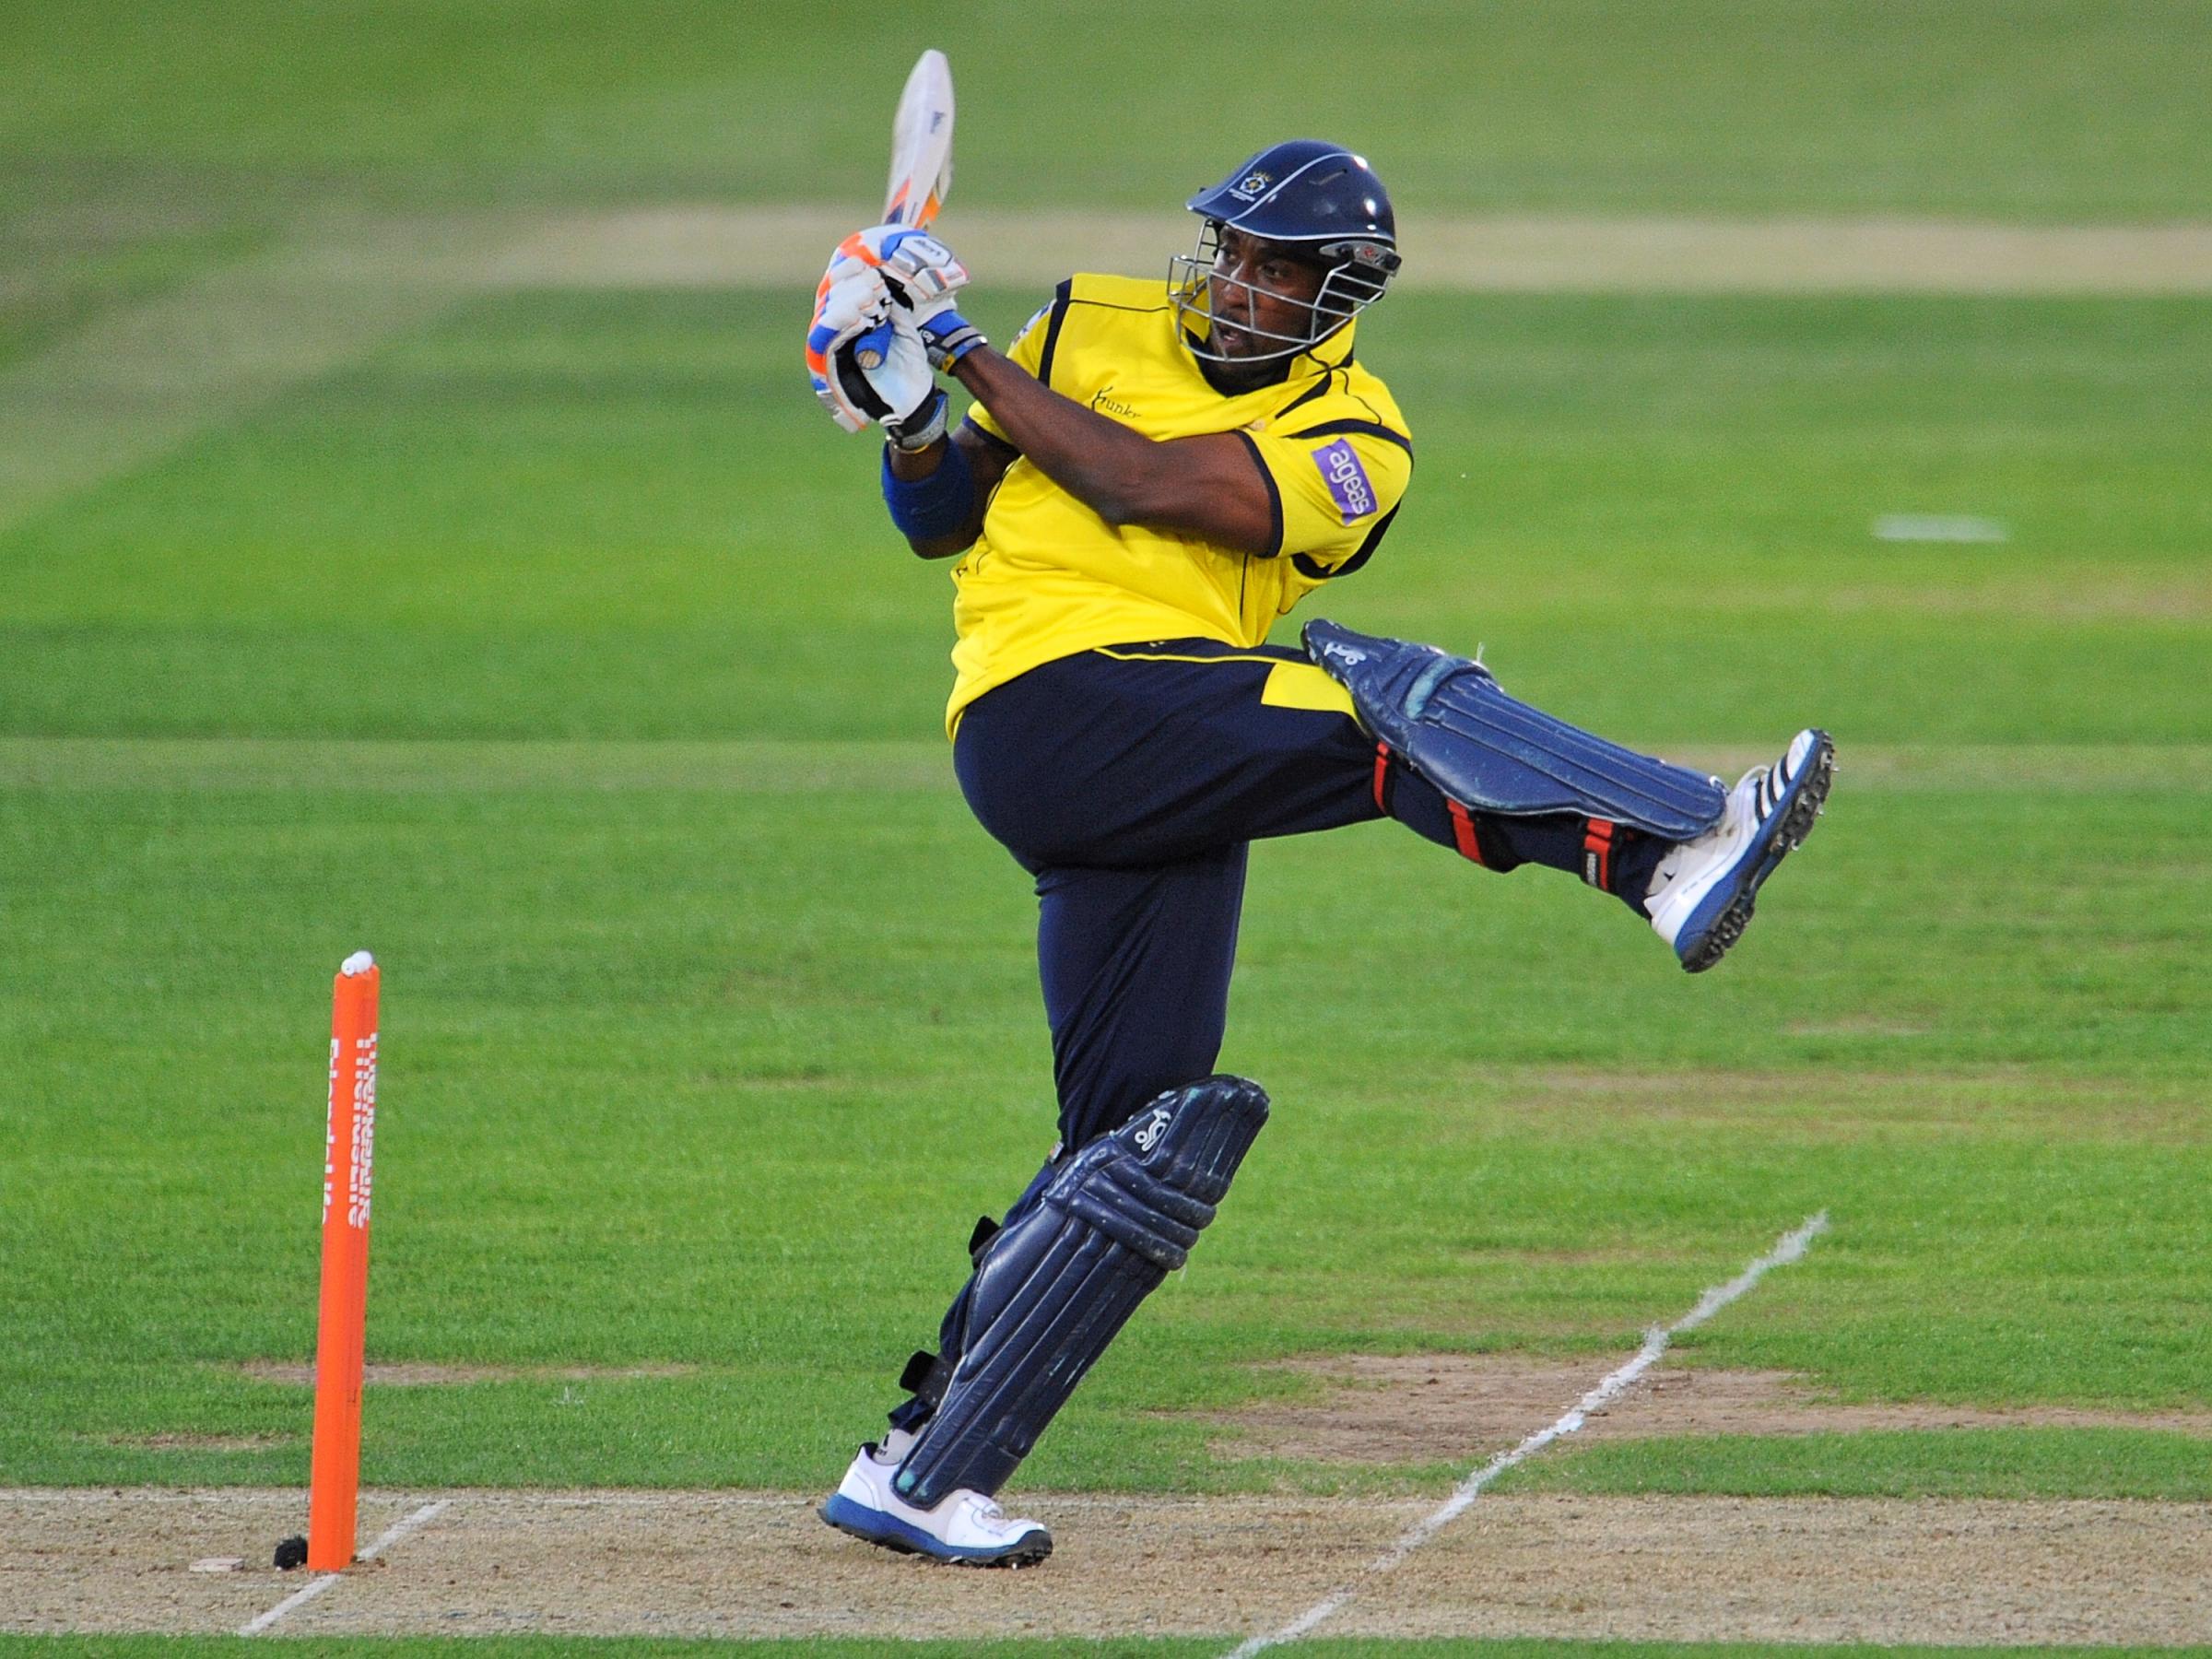 Hampshire Cricket's Michael Carberry continues comeback from cancer with T20 blitz - Daily Echo